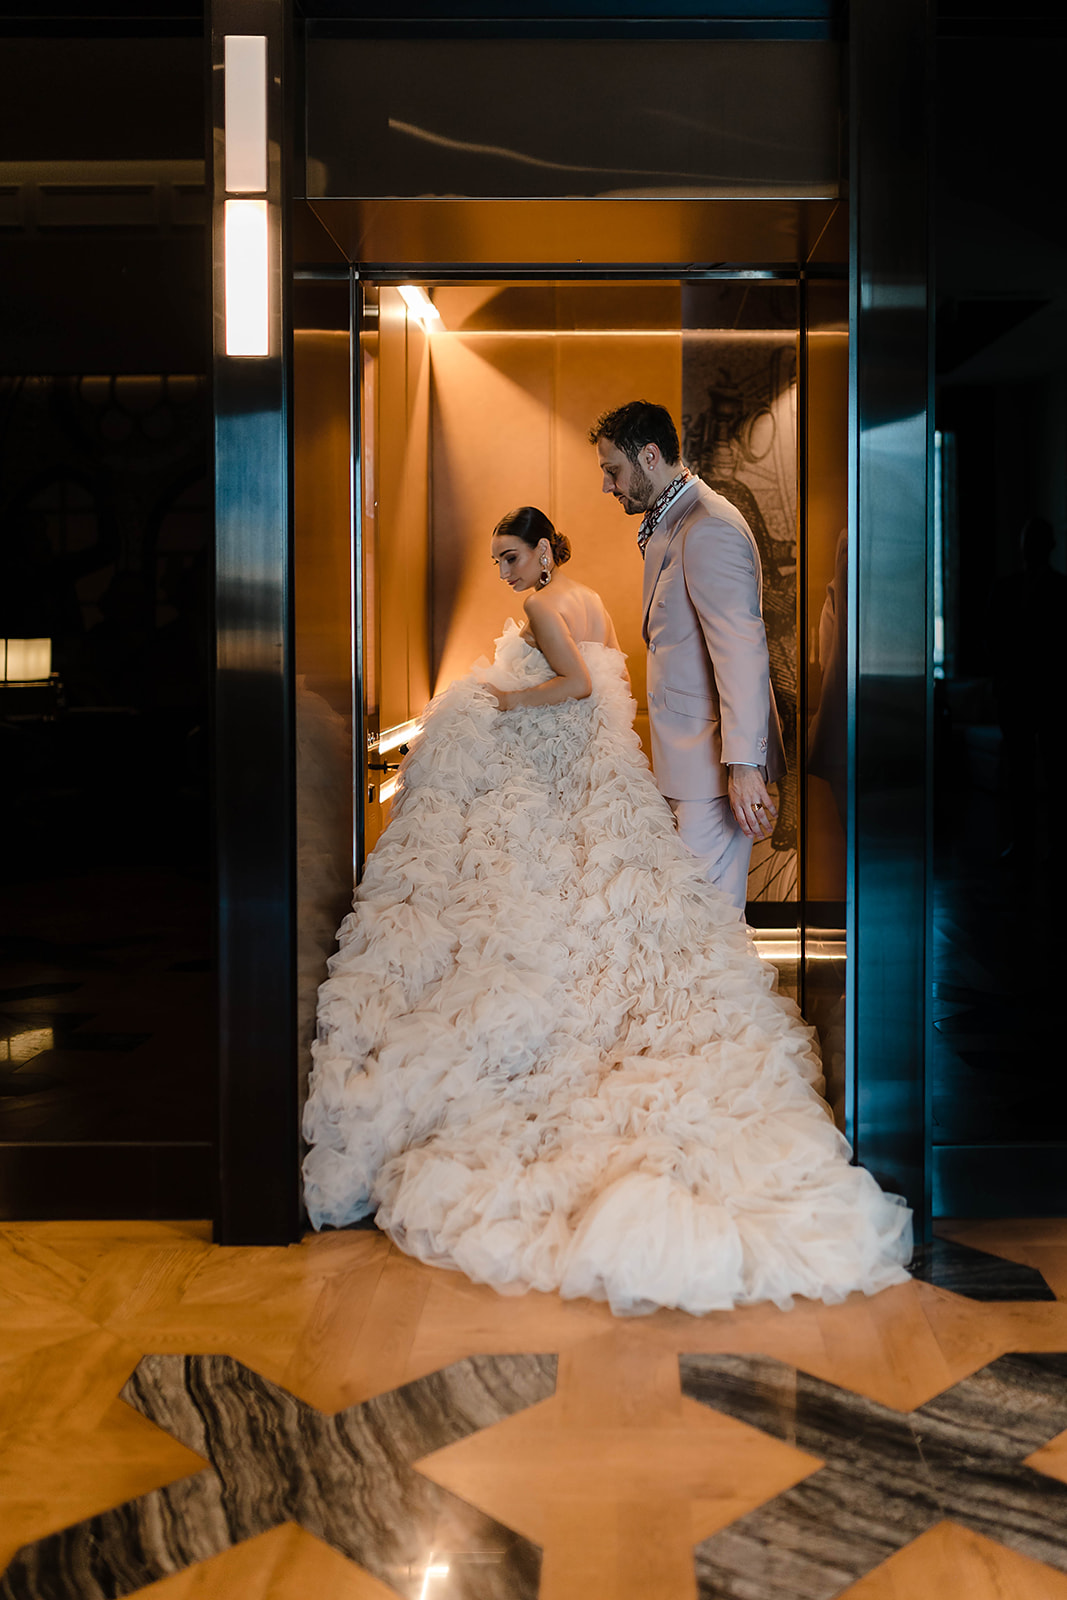 The bride and groom on the elevator of Sofitel Adelaide hotel